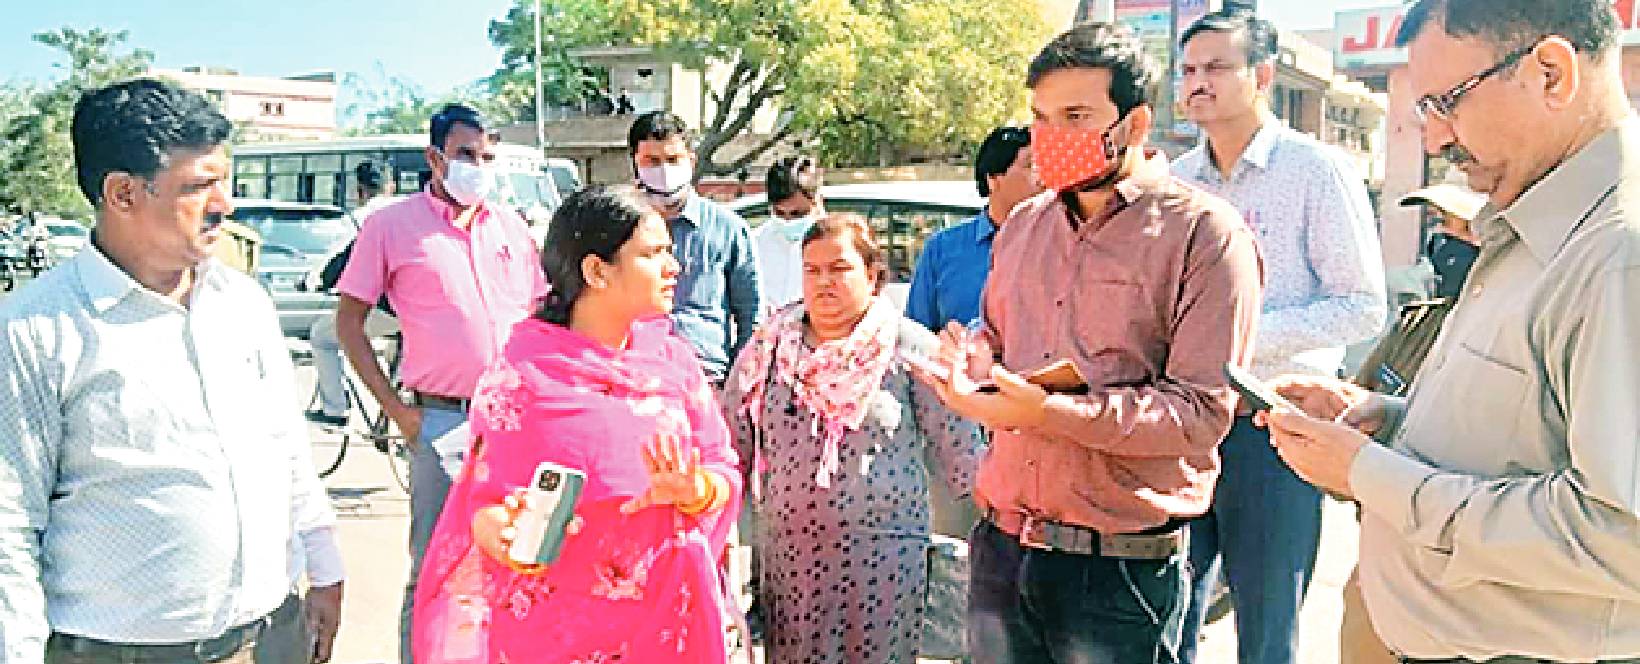 Mayor inspects cleanliness ahead of Bhagwat Katha